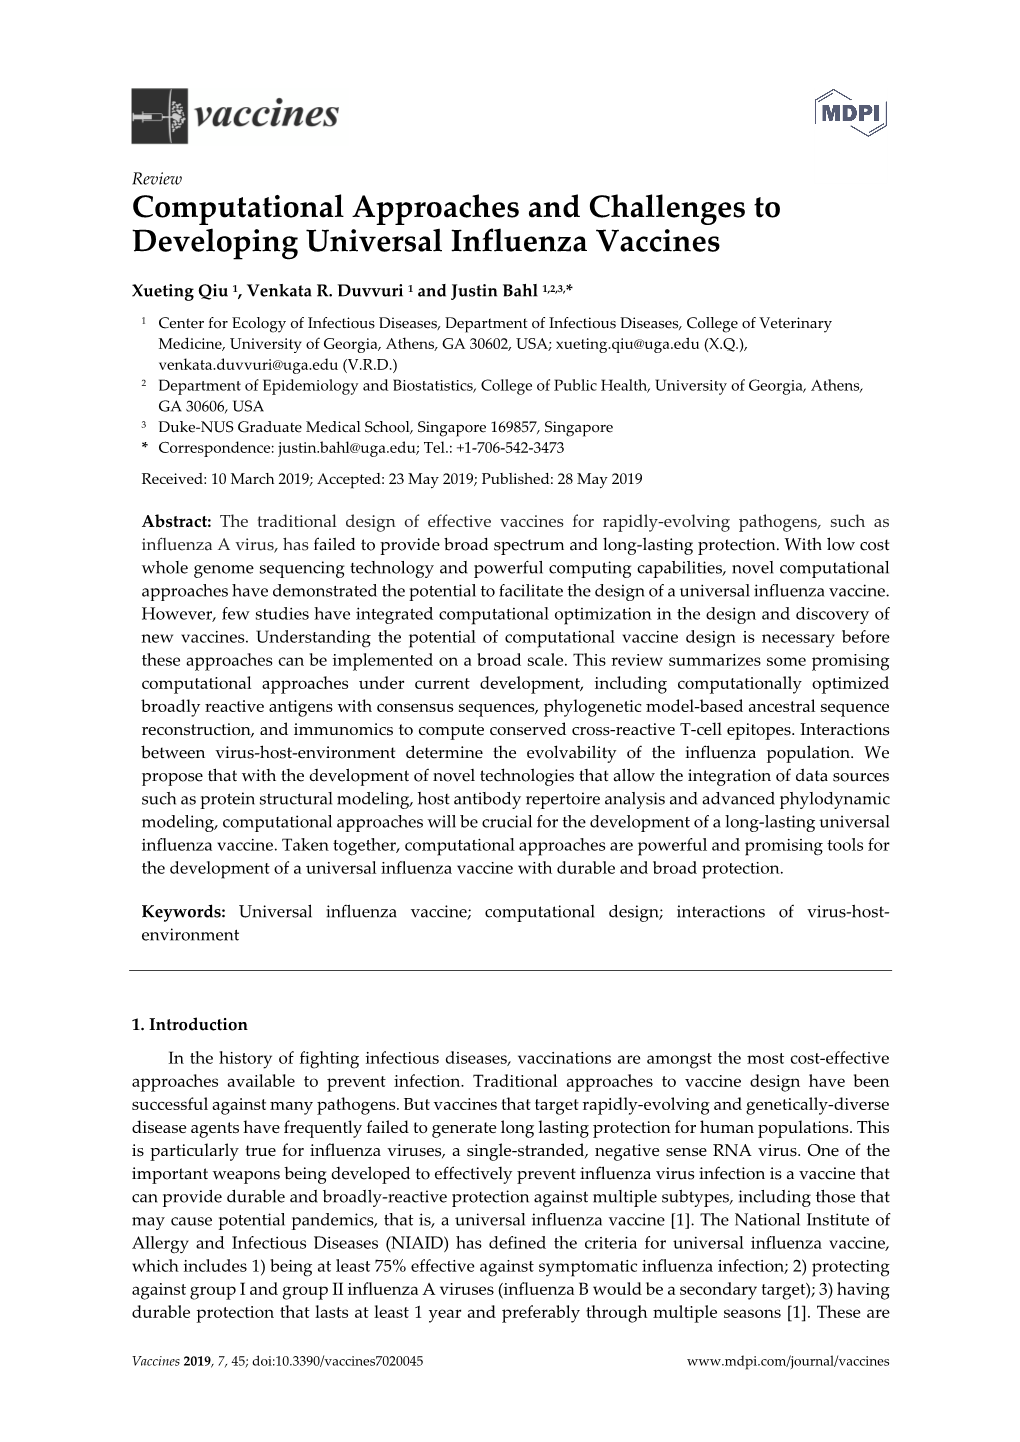 Computational Approaches and Challenges to Developing Universal Influenza Vaccines